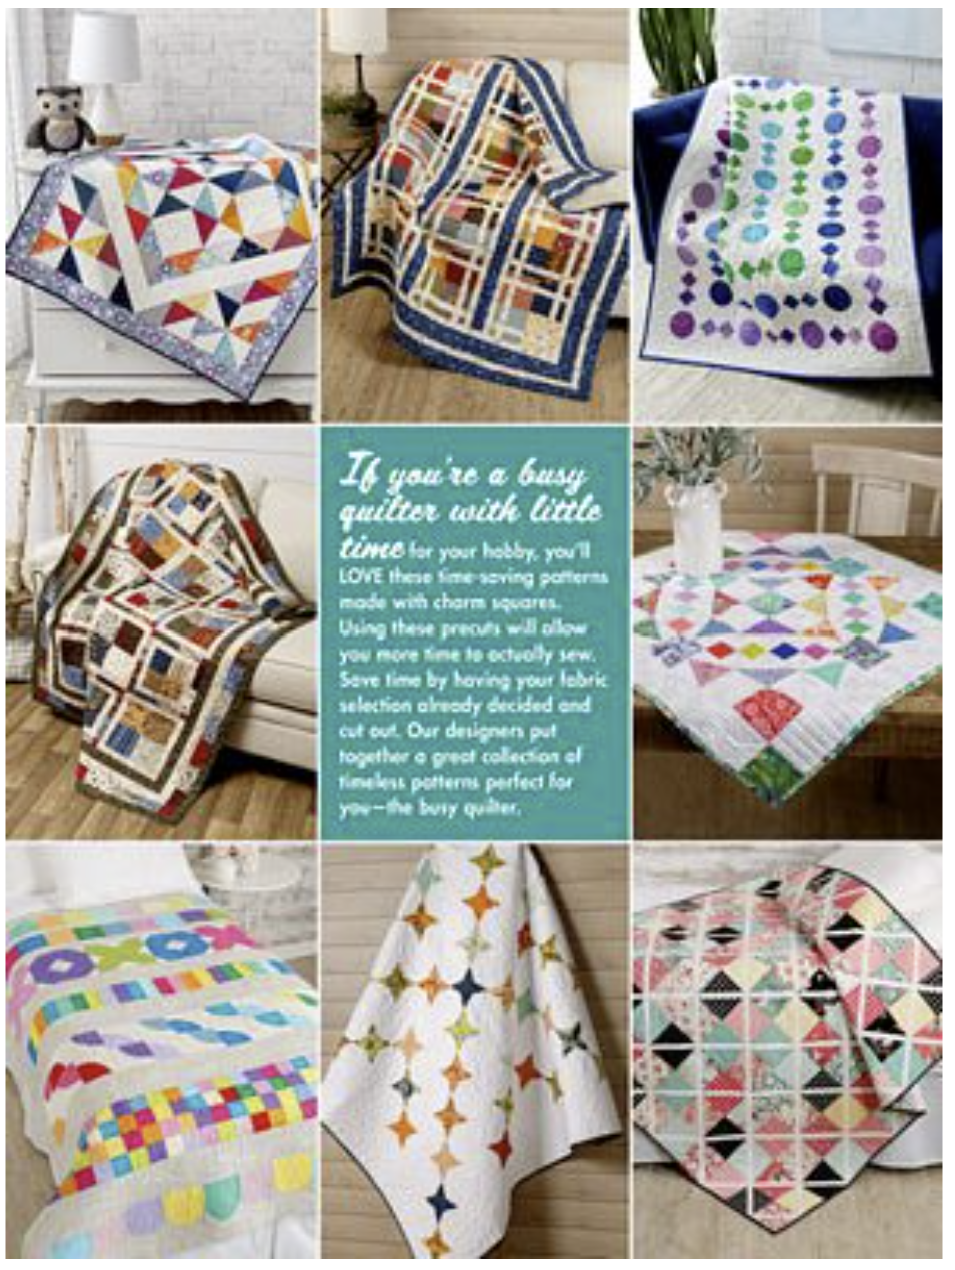 Time-Saving Charm Quilts - Book of Patterns